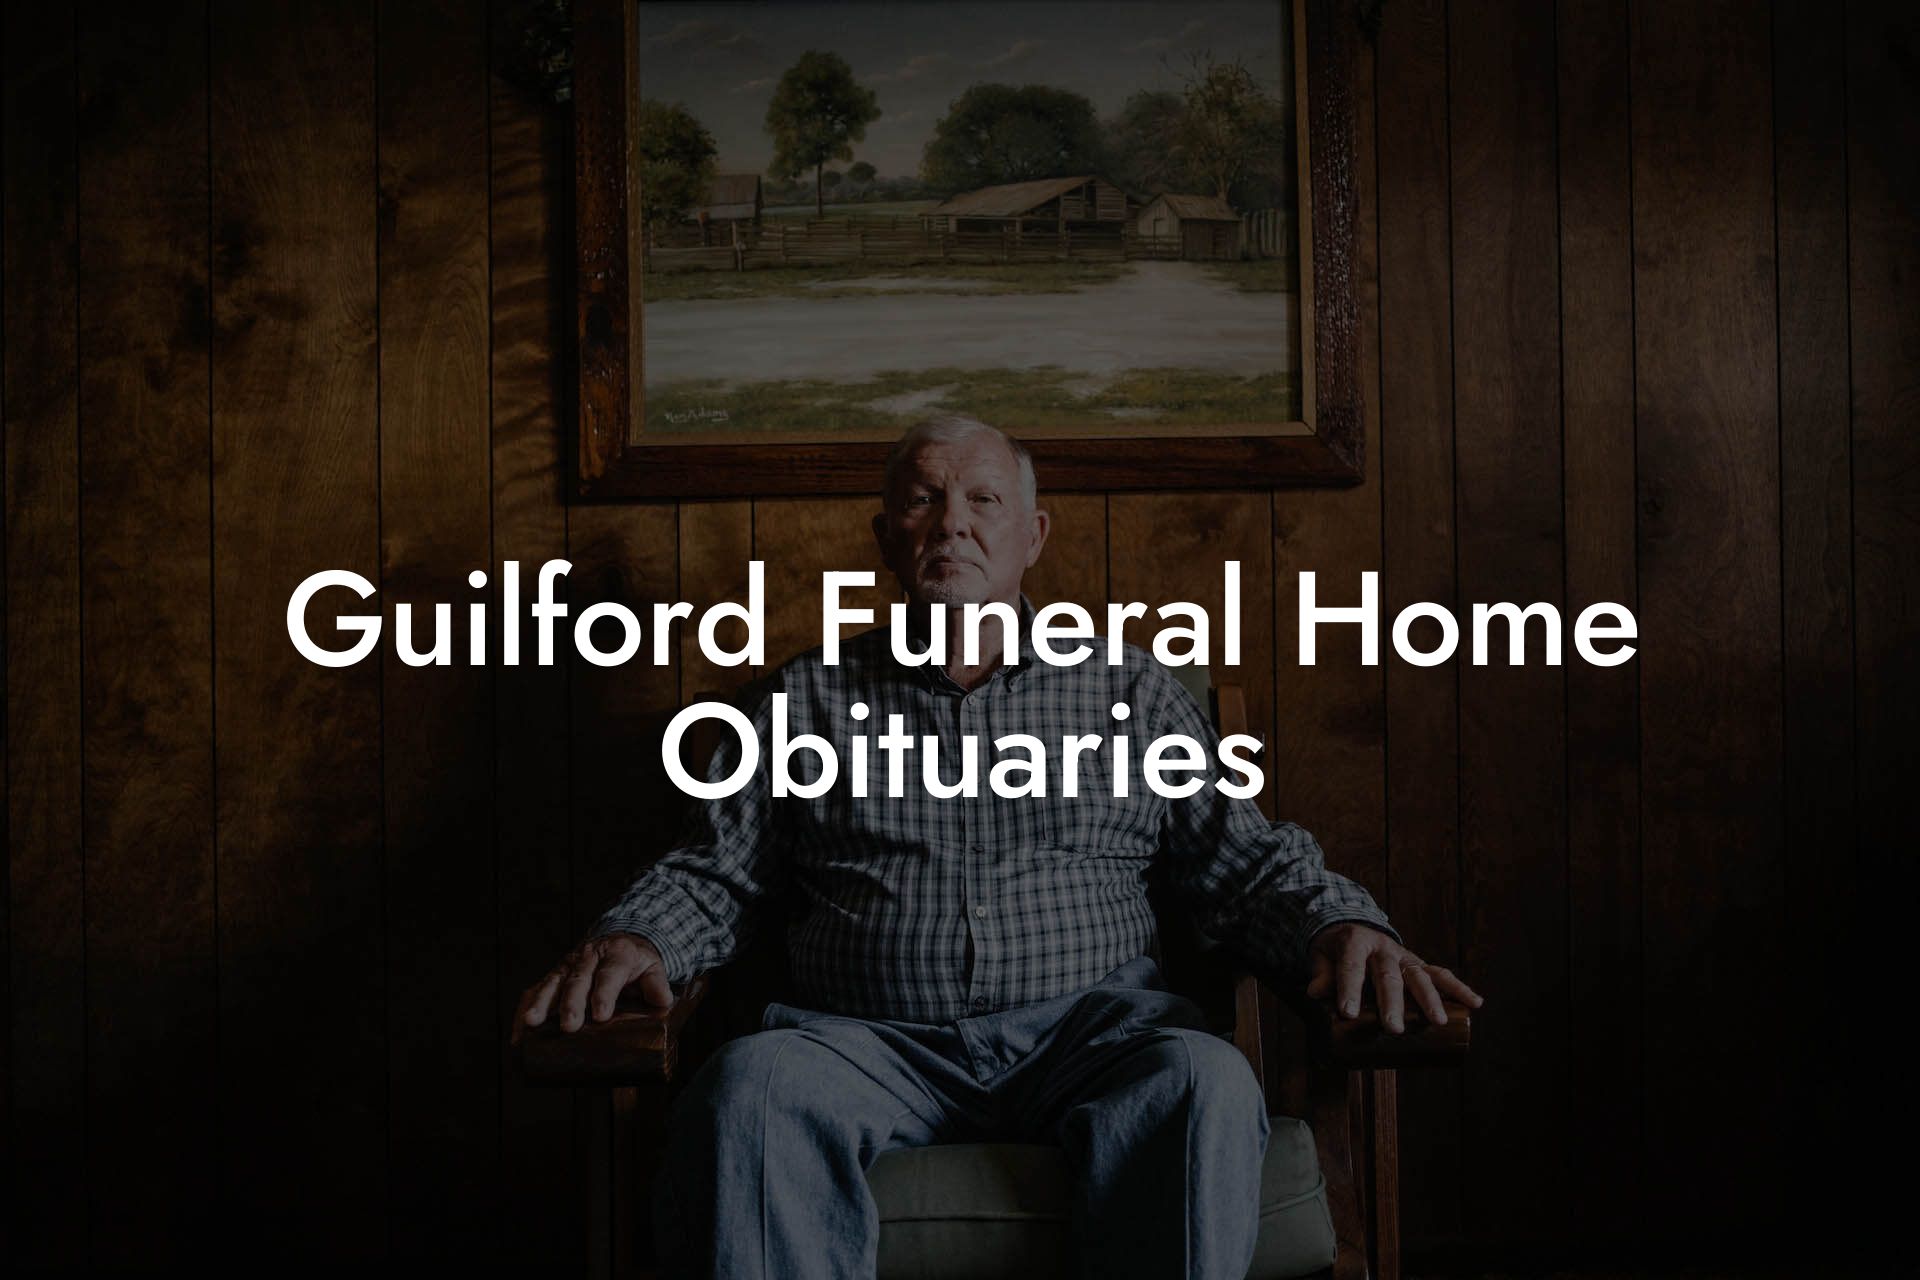 Guilford Funeral Home Obituaries